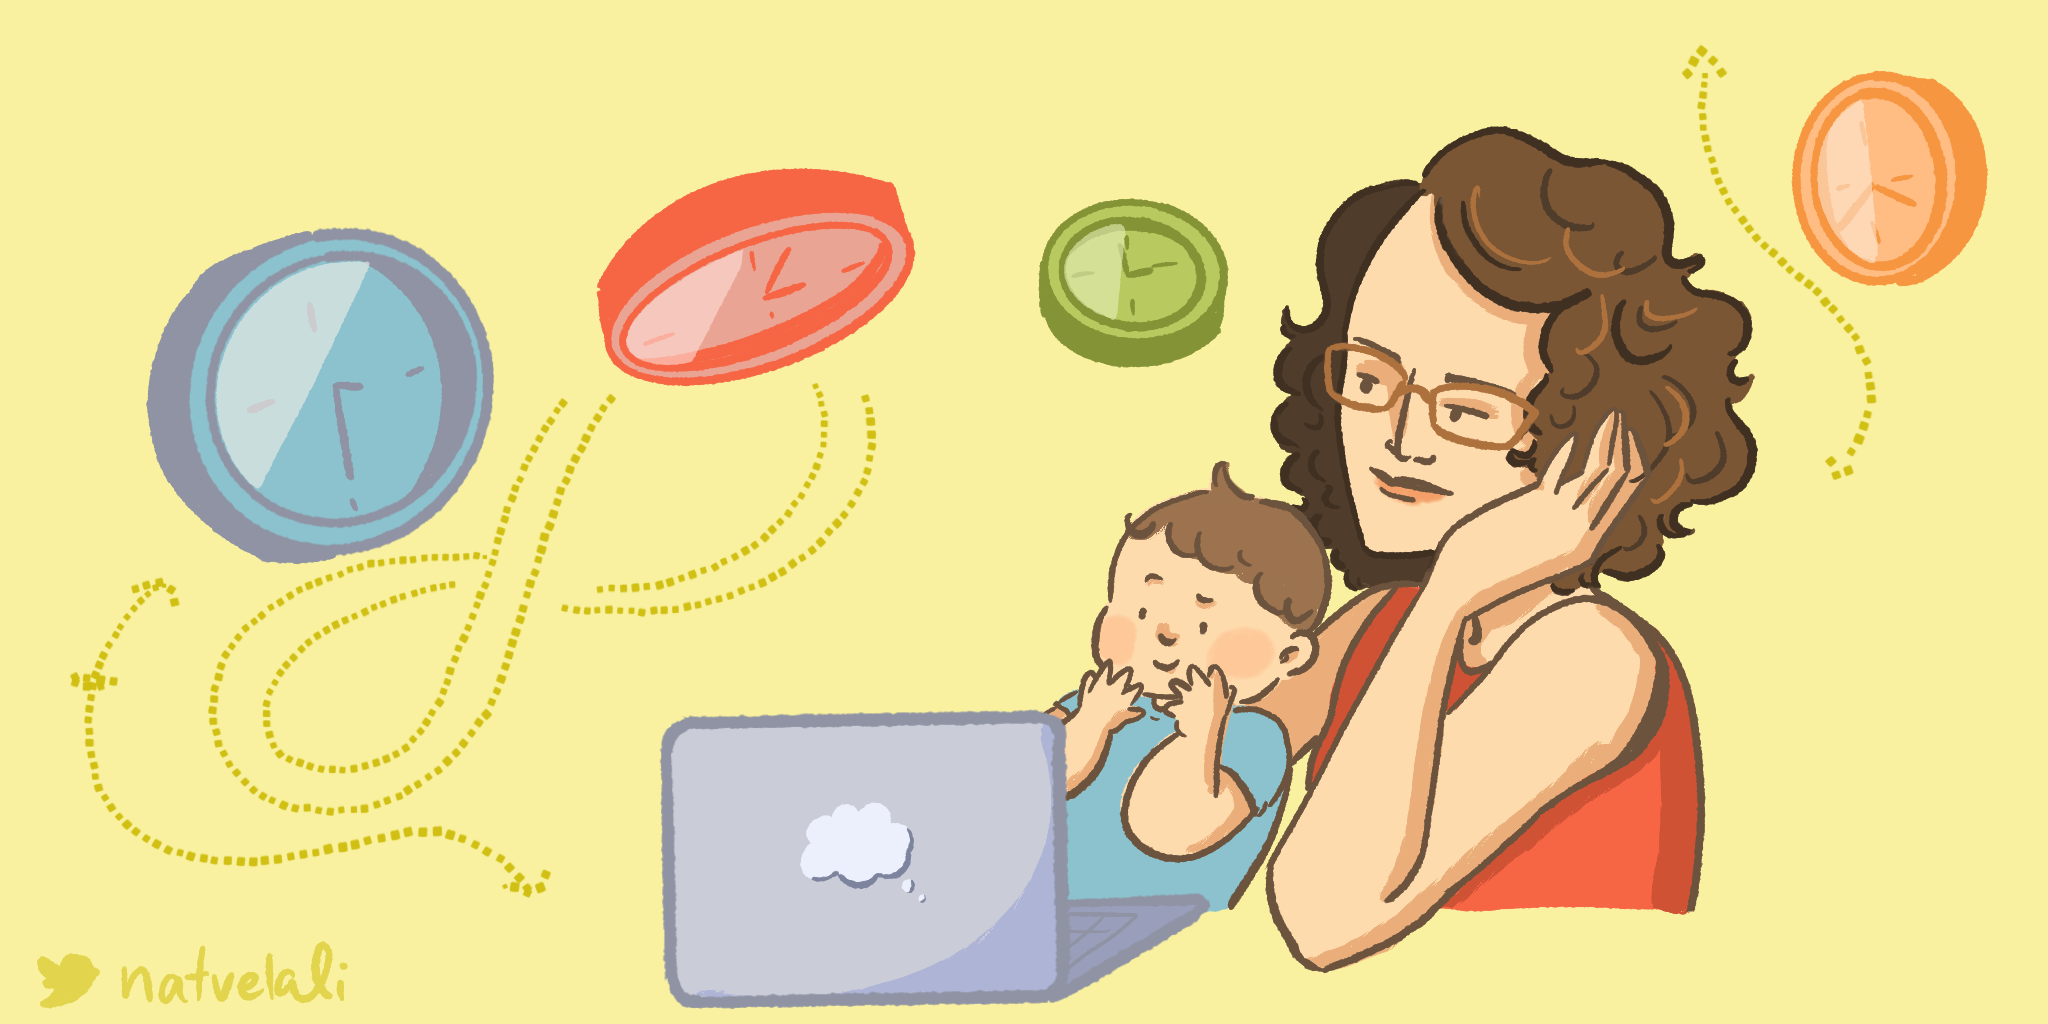 A woman with an infant in her lap, both looking at a laptop. Clocks swirl in the air around them.